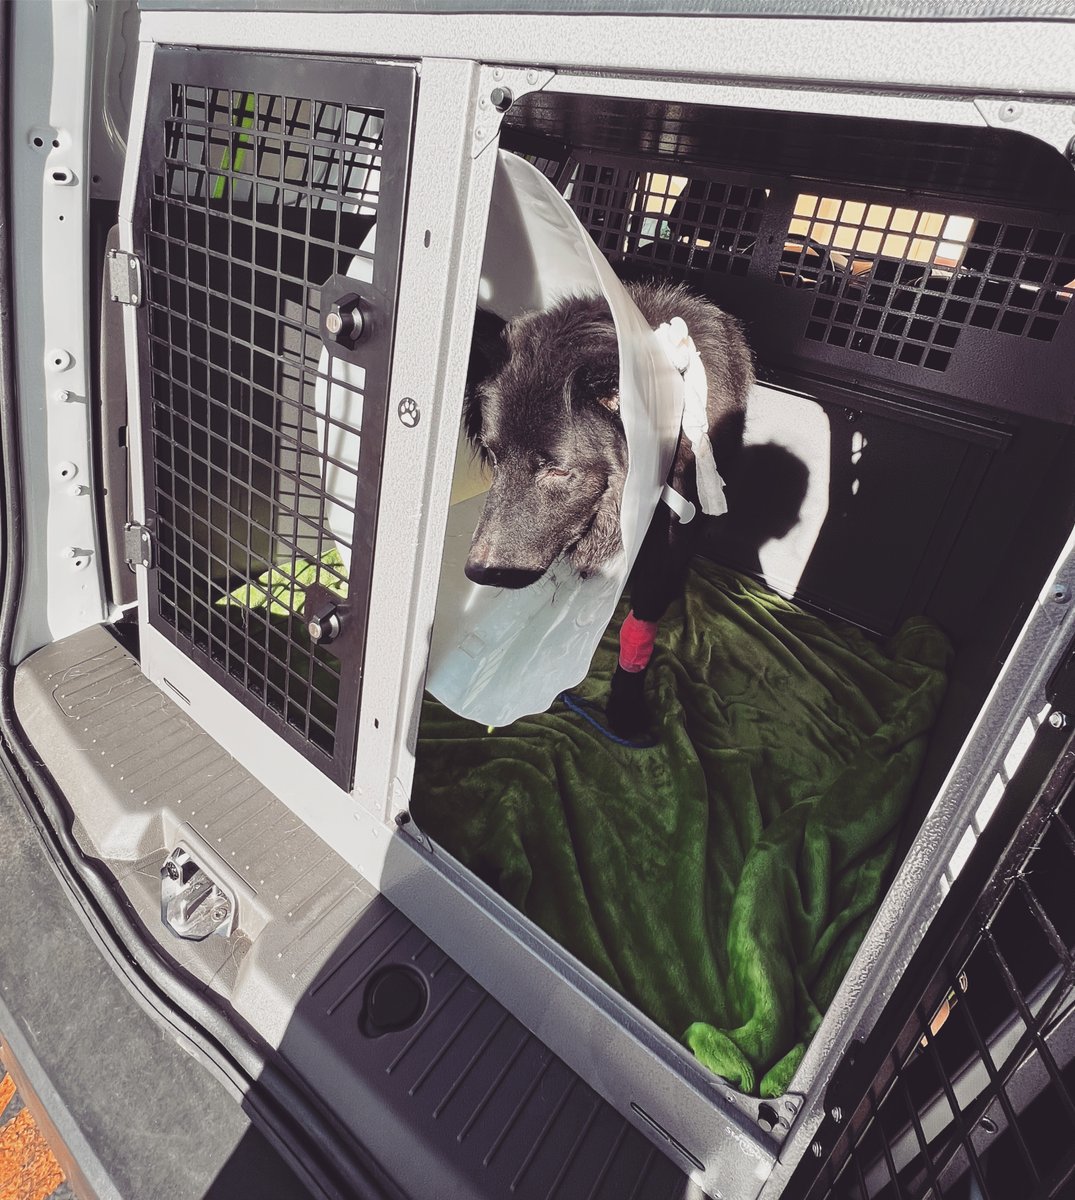 Thank you Ranger for allowing us to transport you safely from one destination to another! #pettransport